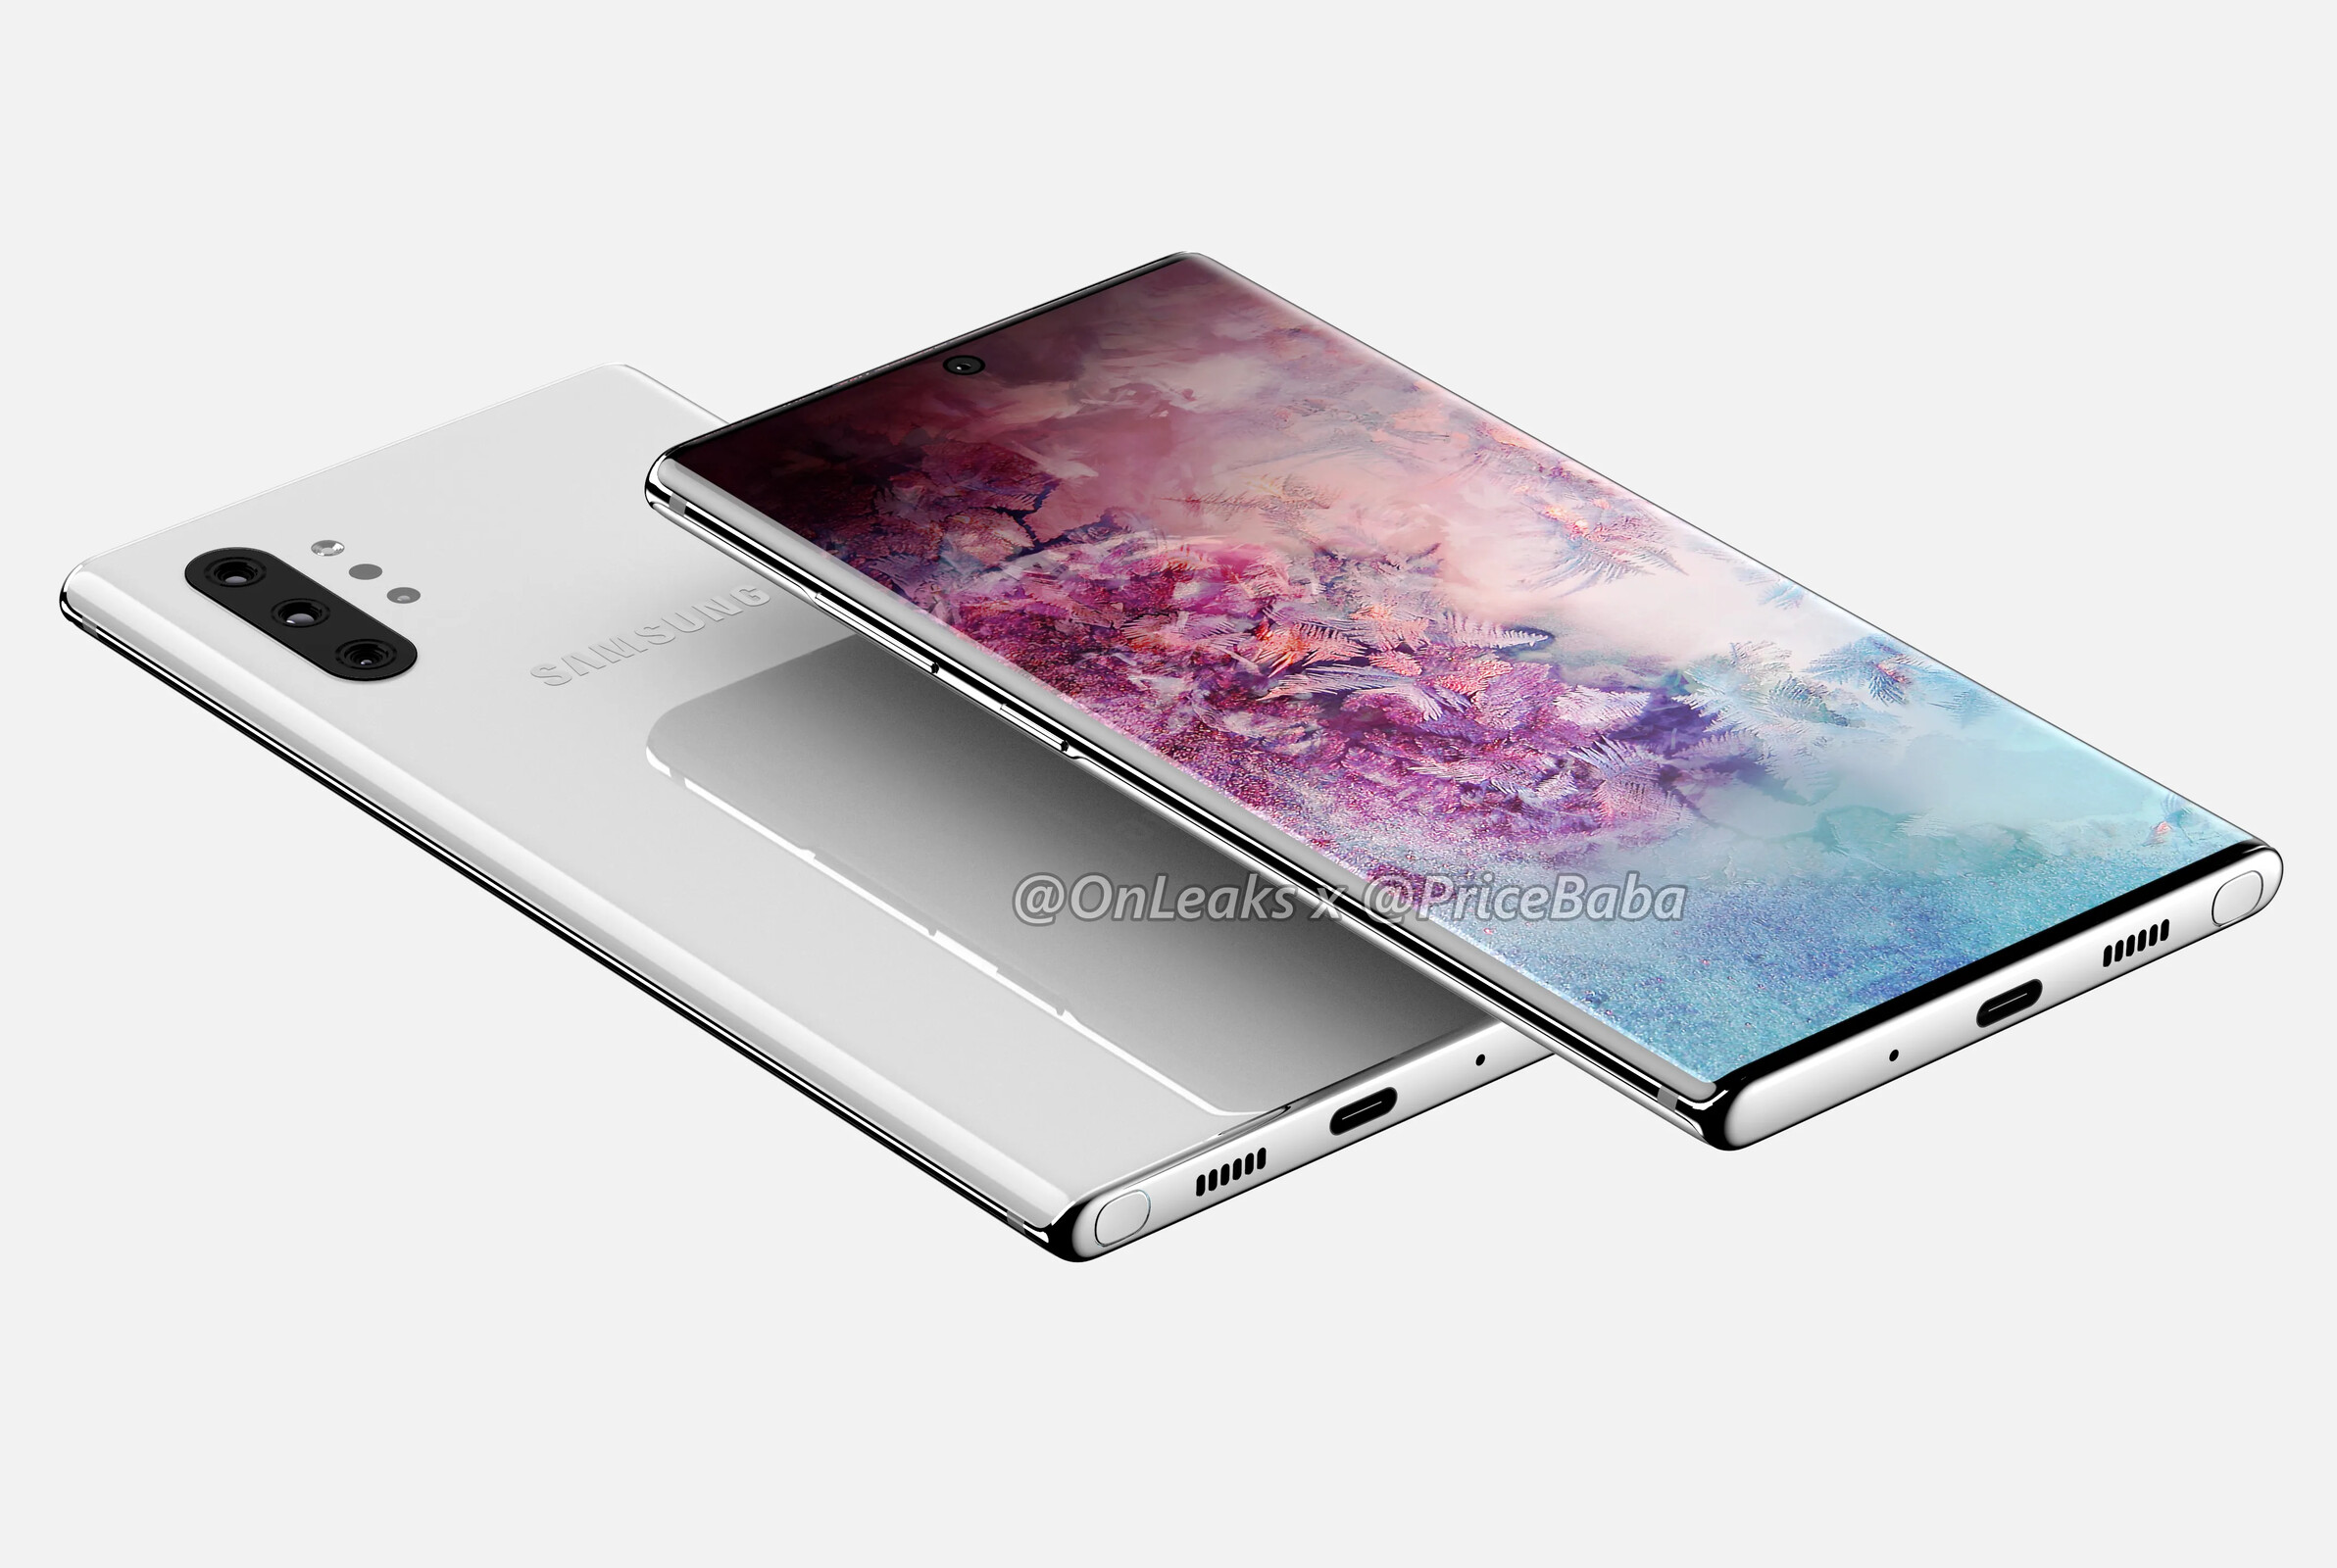 Deskundige Haven temperament Galaxy Note 10 phones confirmed to feature a brand new SoC as pricing  details leak - NotebookCheck.net News